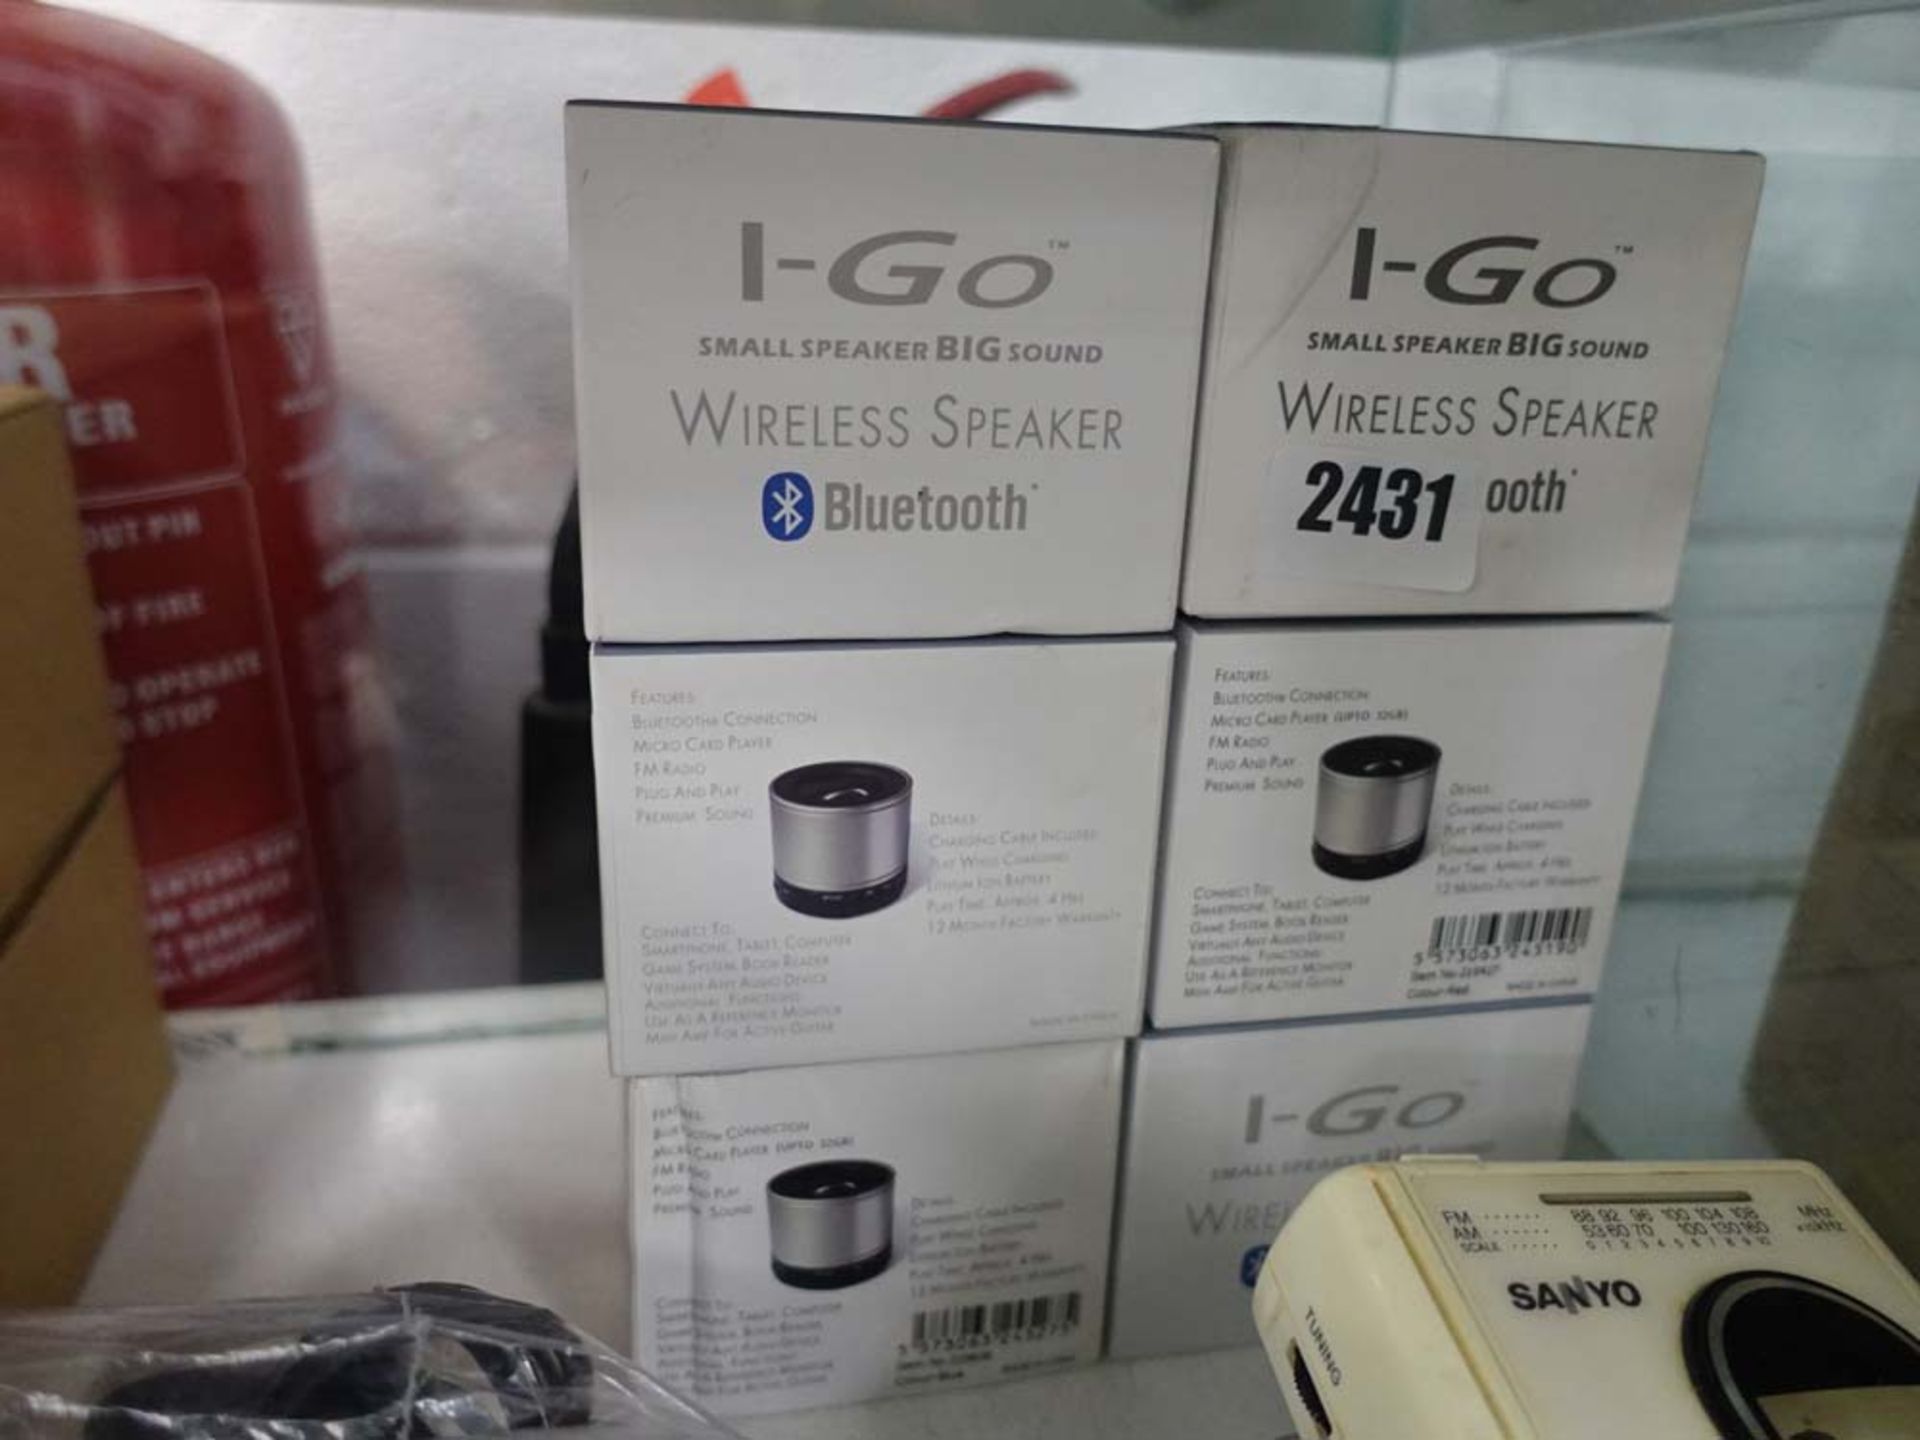 6 boxed I-Go wireless speakers in boxes